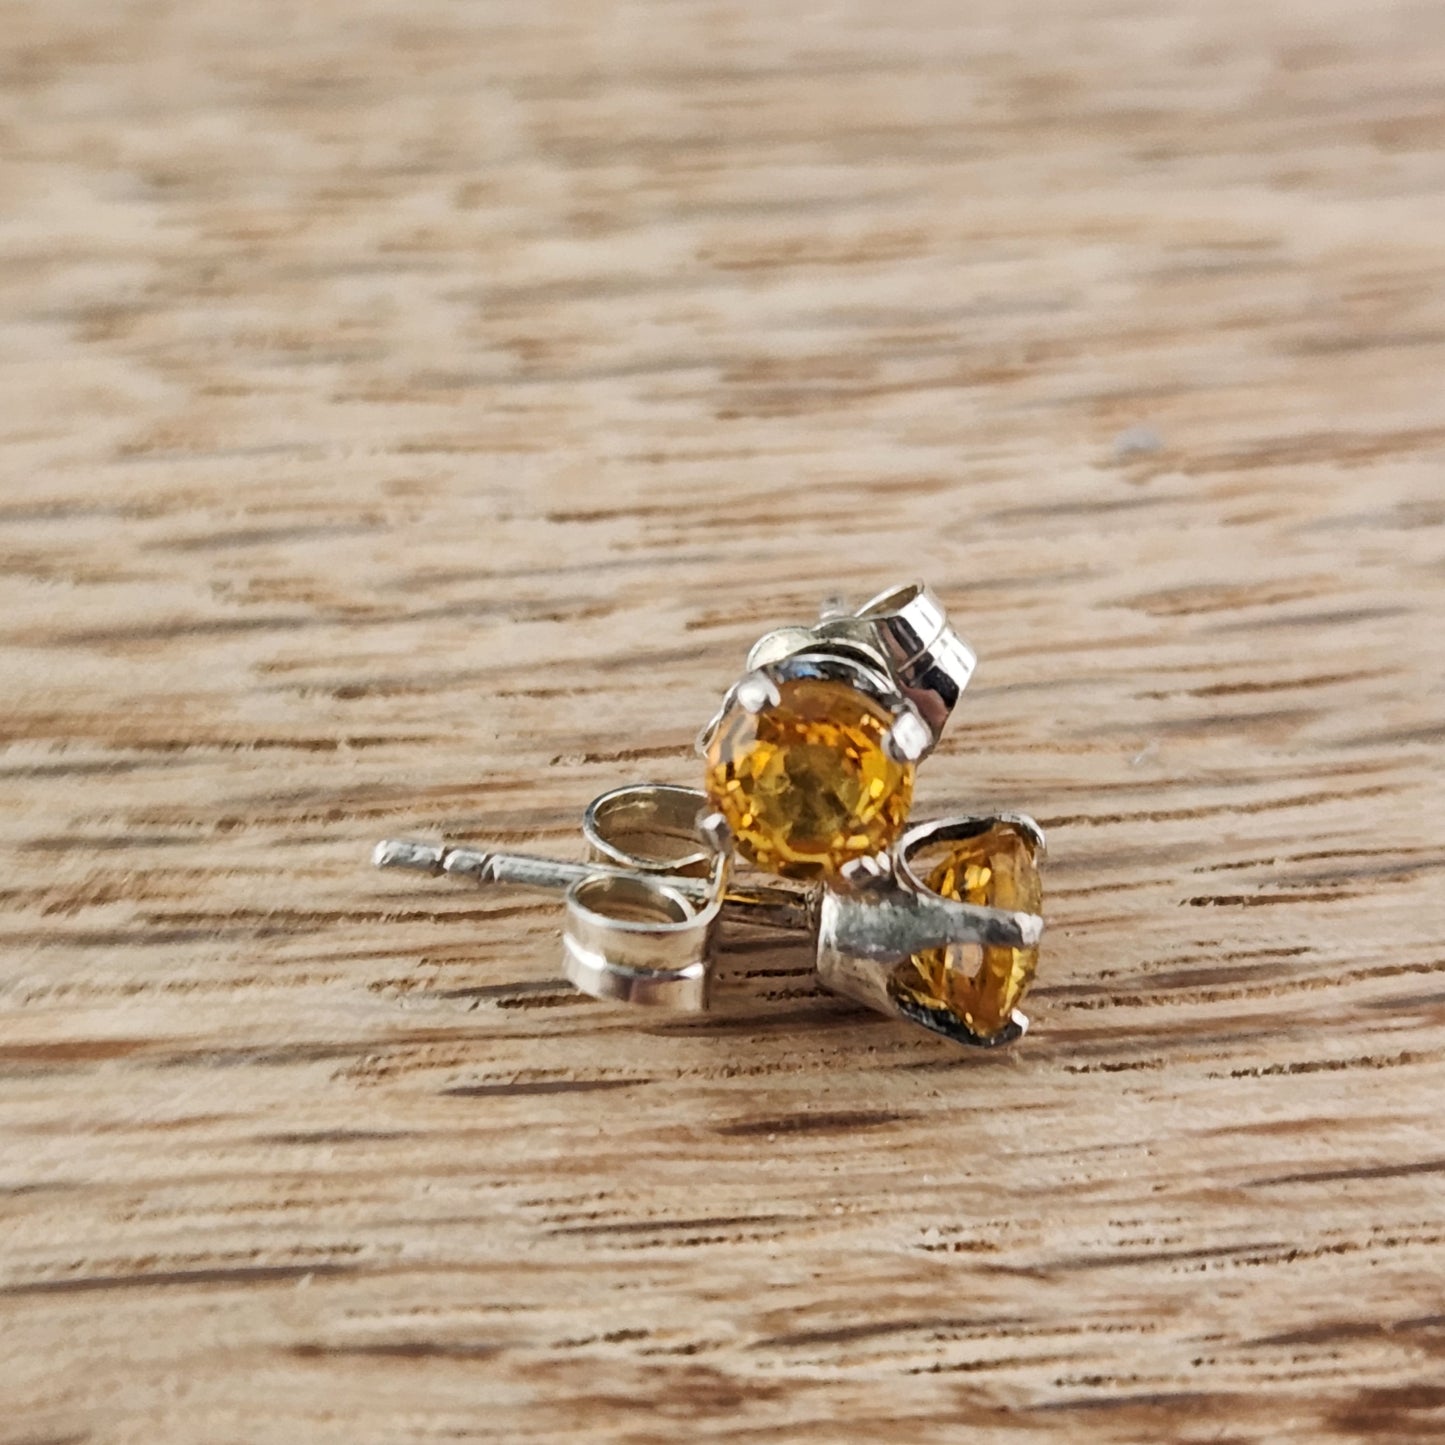 1.05 ct Yellow Sapphire set in sterling silver earrings